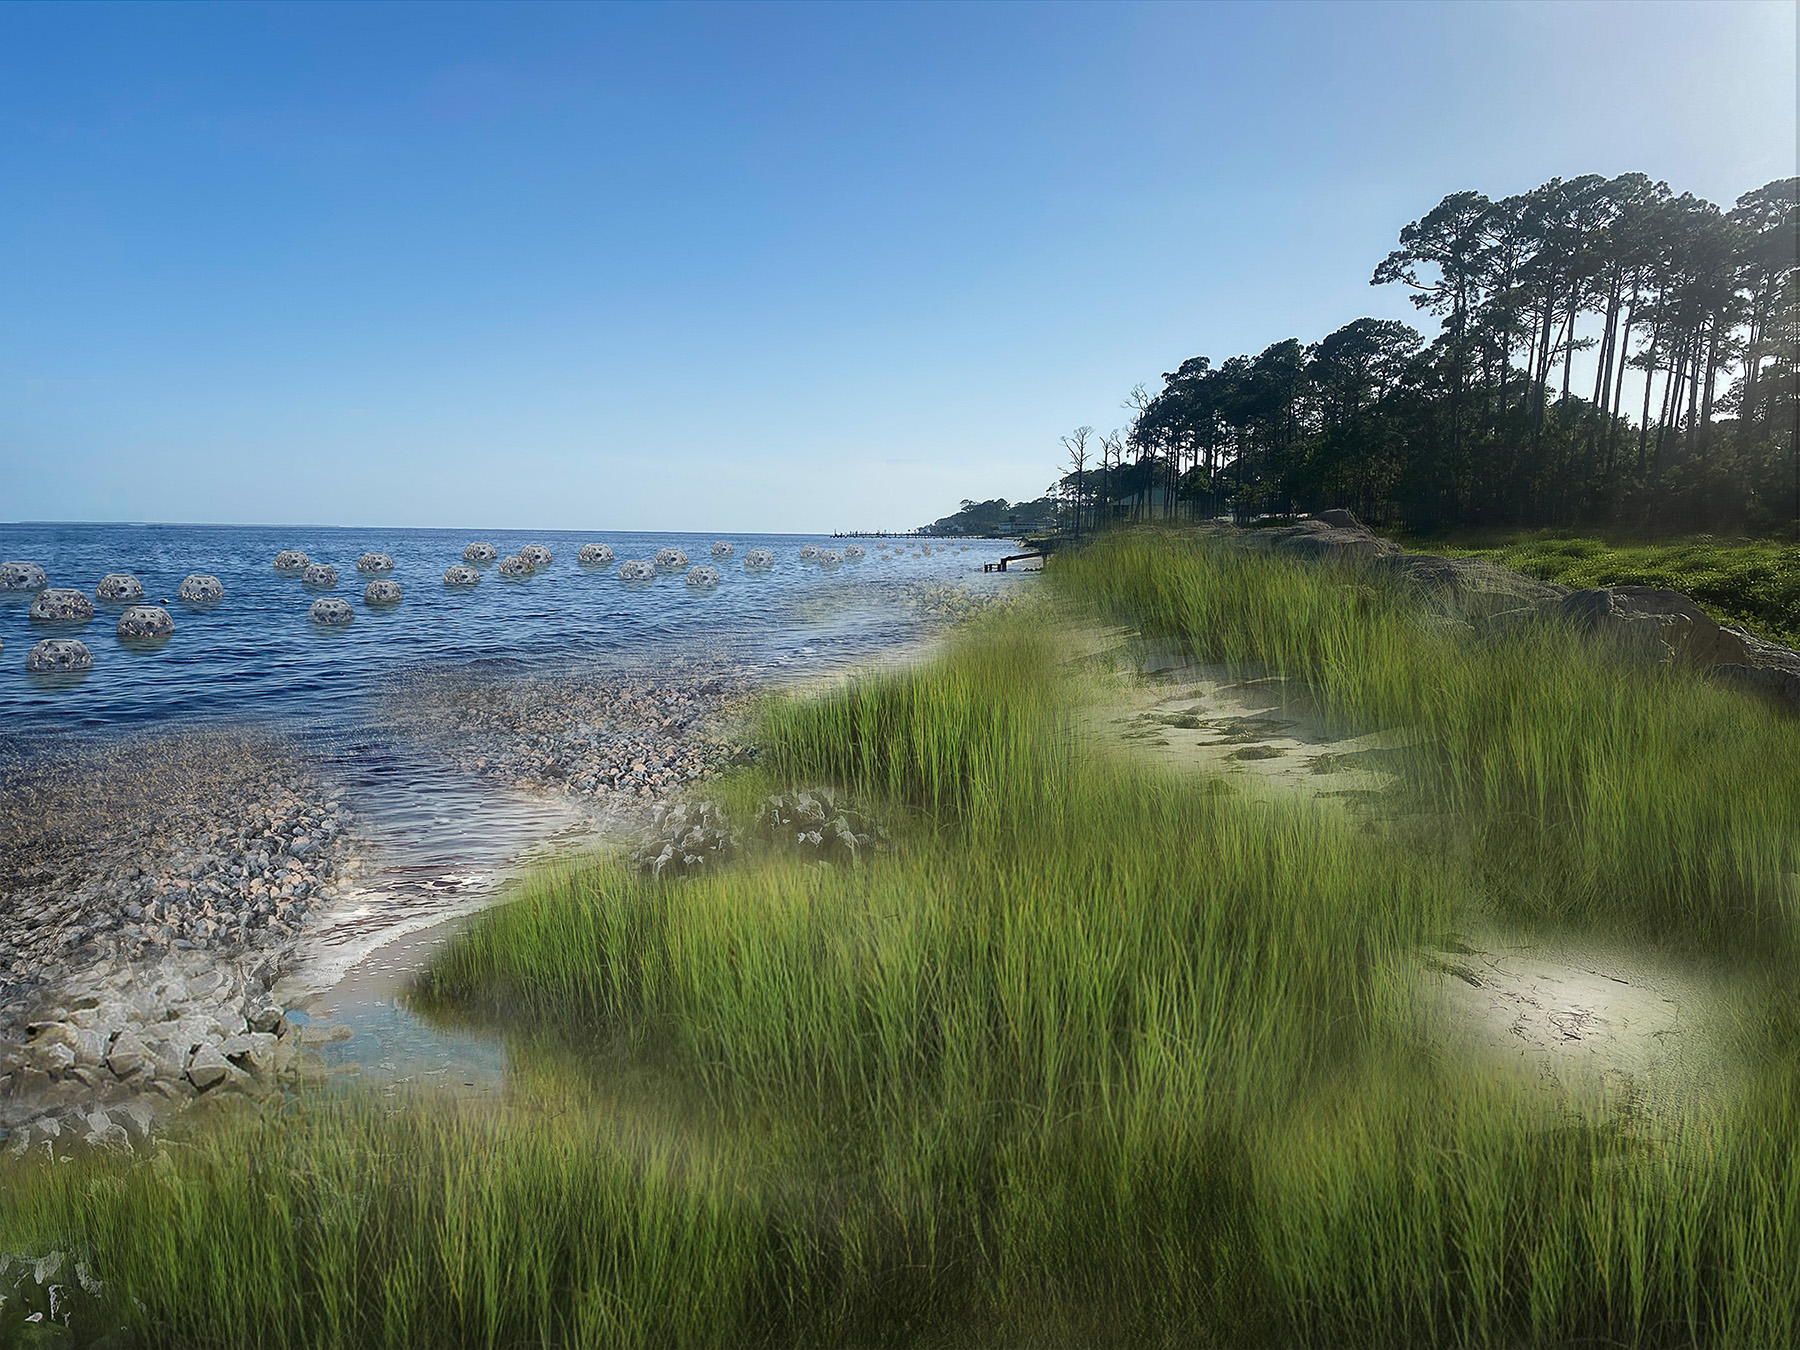 Rendering of a restored coastline that has ecological enhancements like native sea grasses 